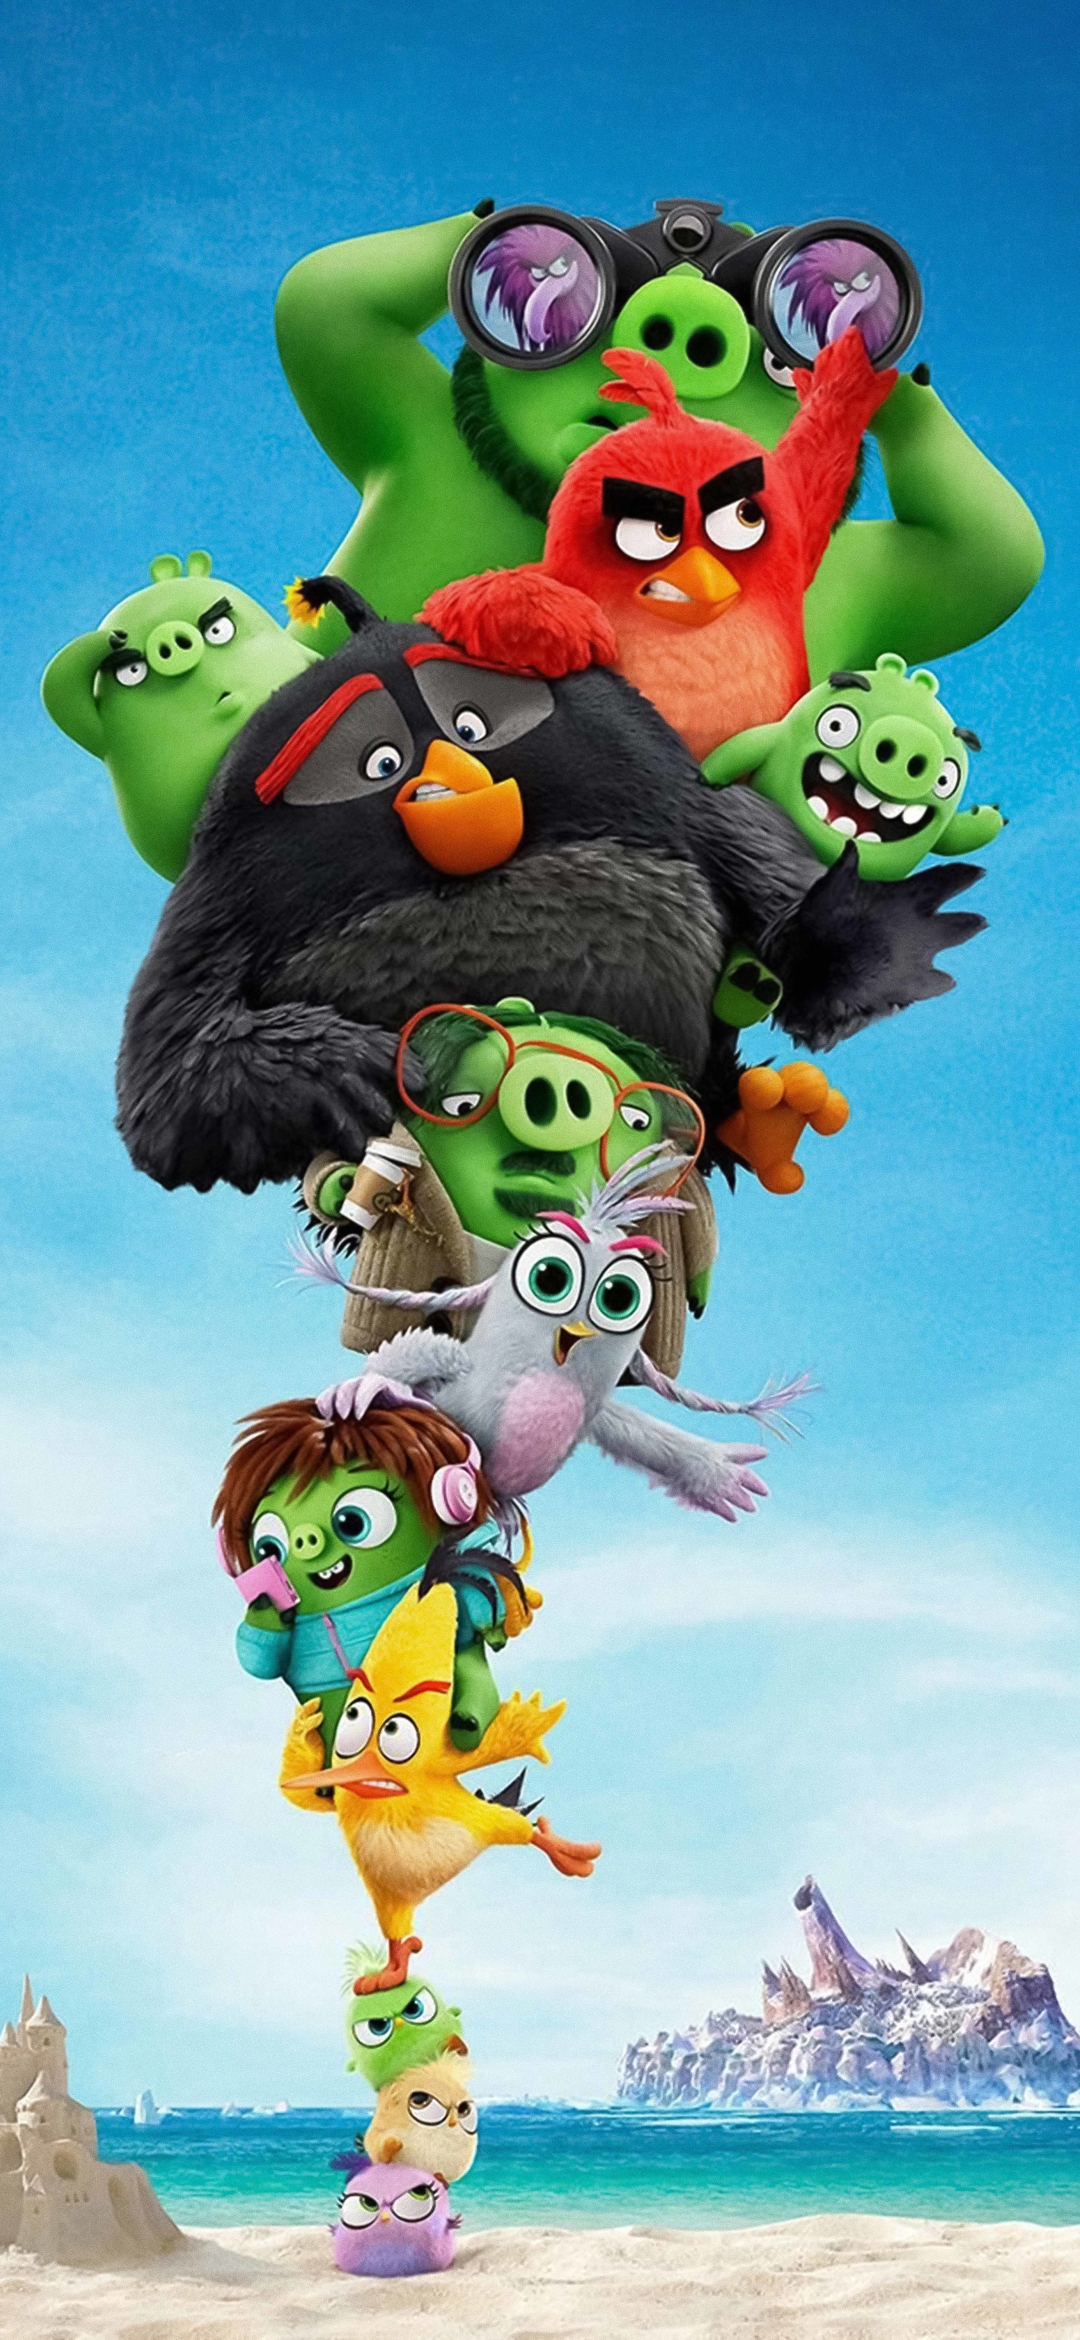 1080x2340 The Angry Birds 2 1080x2340 Resolution Wallpaper Hd Movies 4k Wallpapers Images Photos And Background